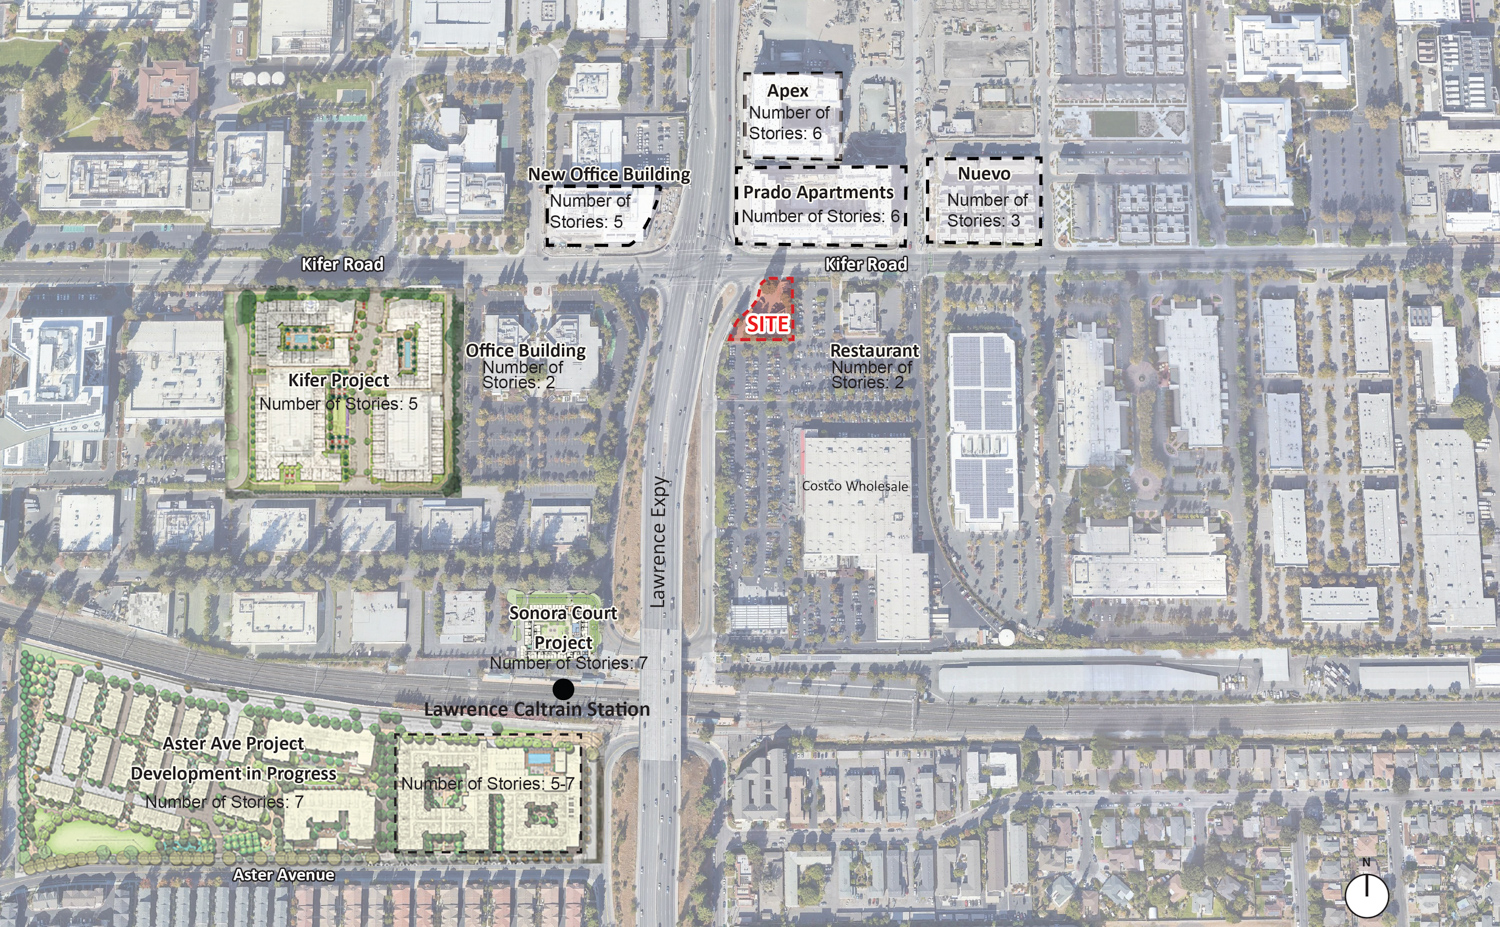 1202 Kifer Road property and surrounding area development, map by Studio T Square